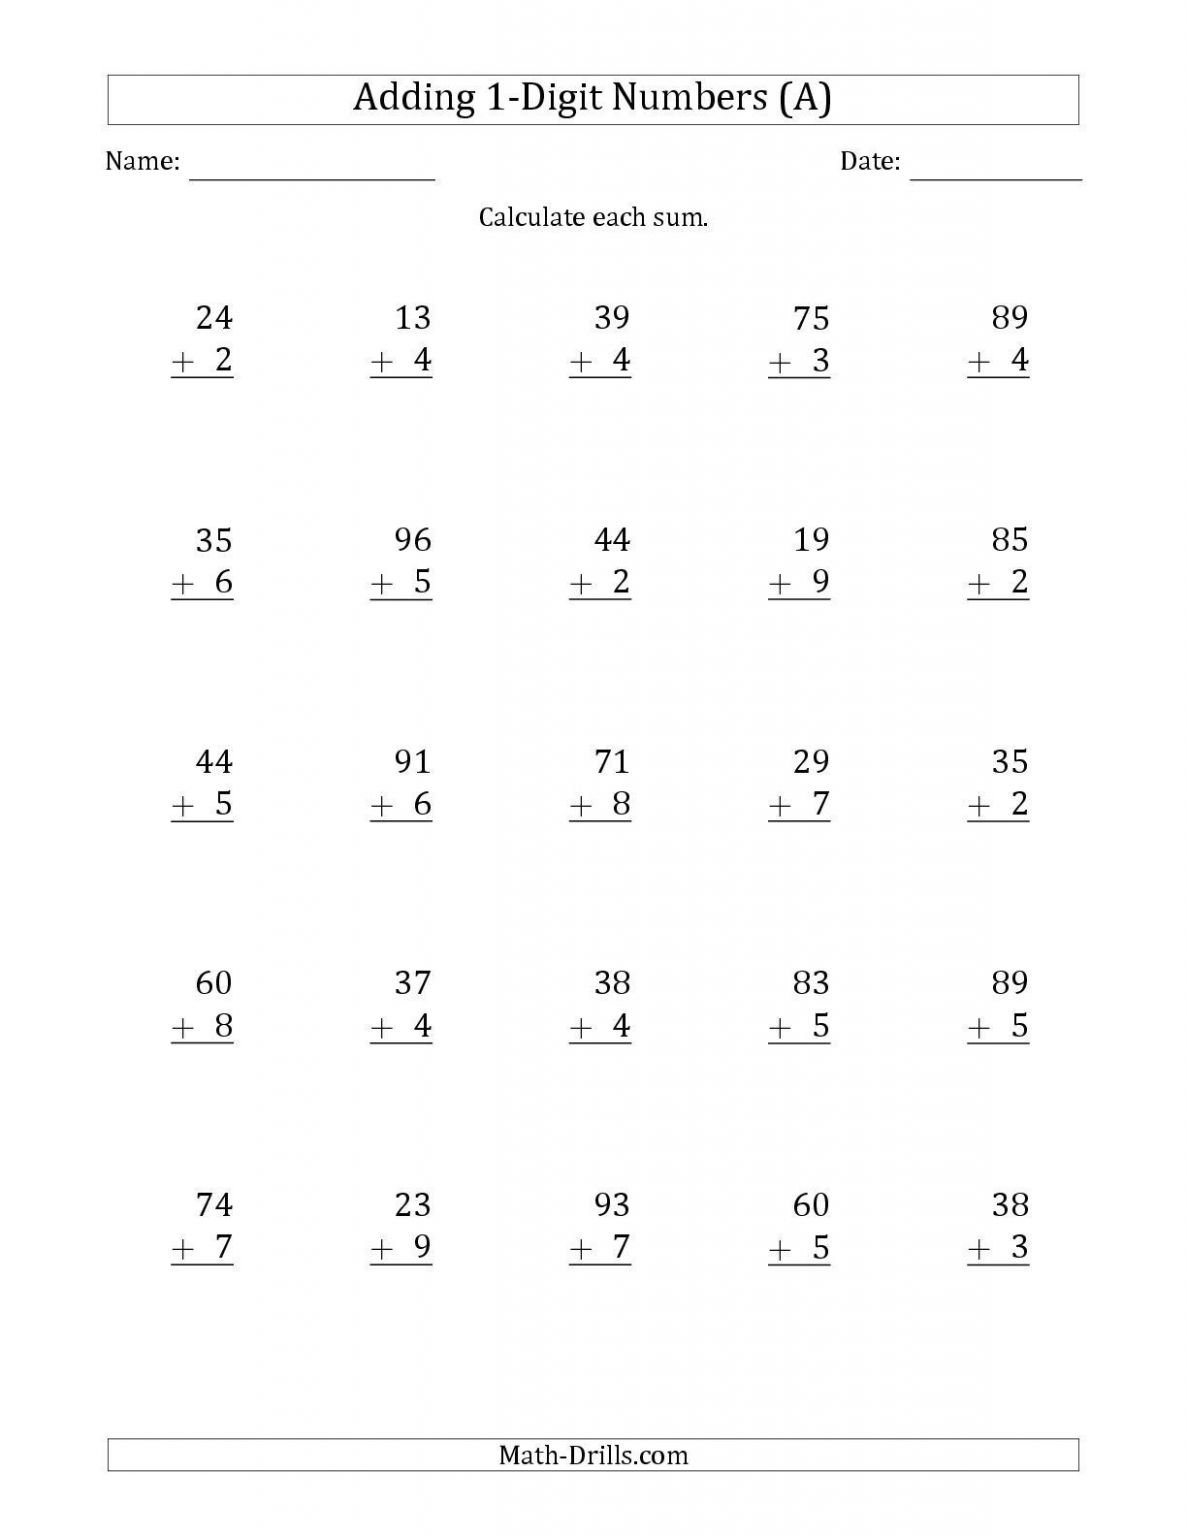 4-free-math-worksheets-third-grade-3-subtraction-subtract-1-digit-from